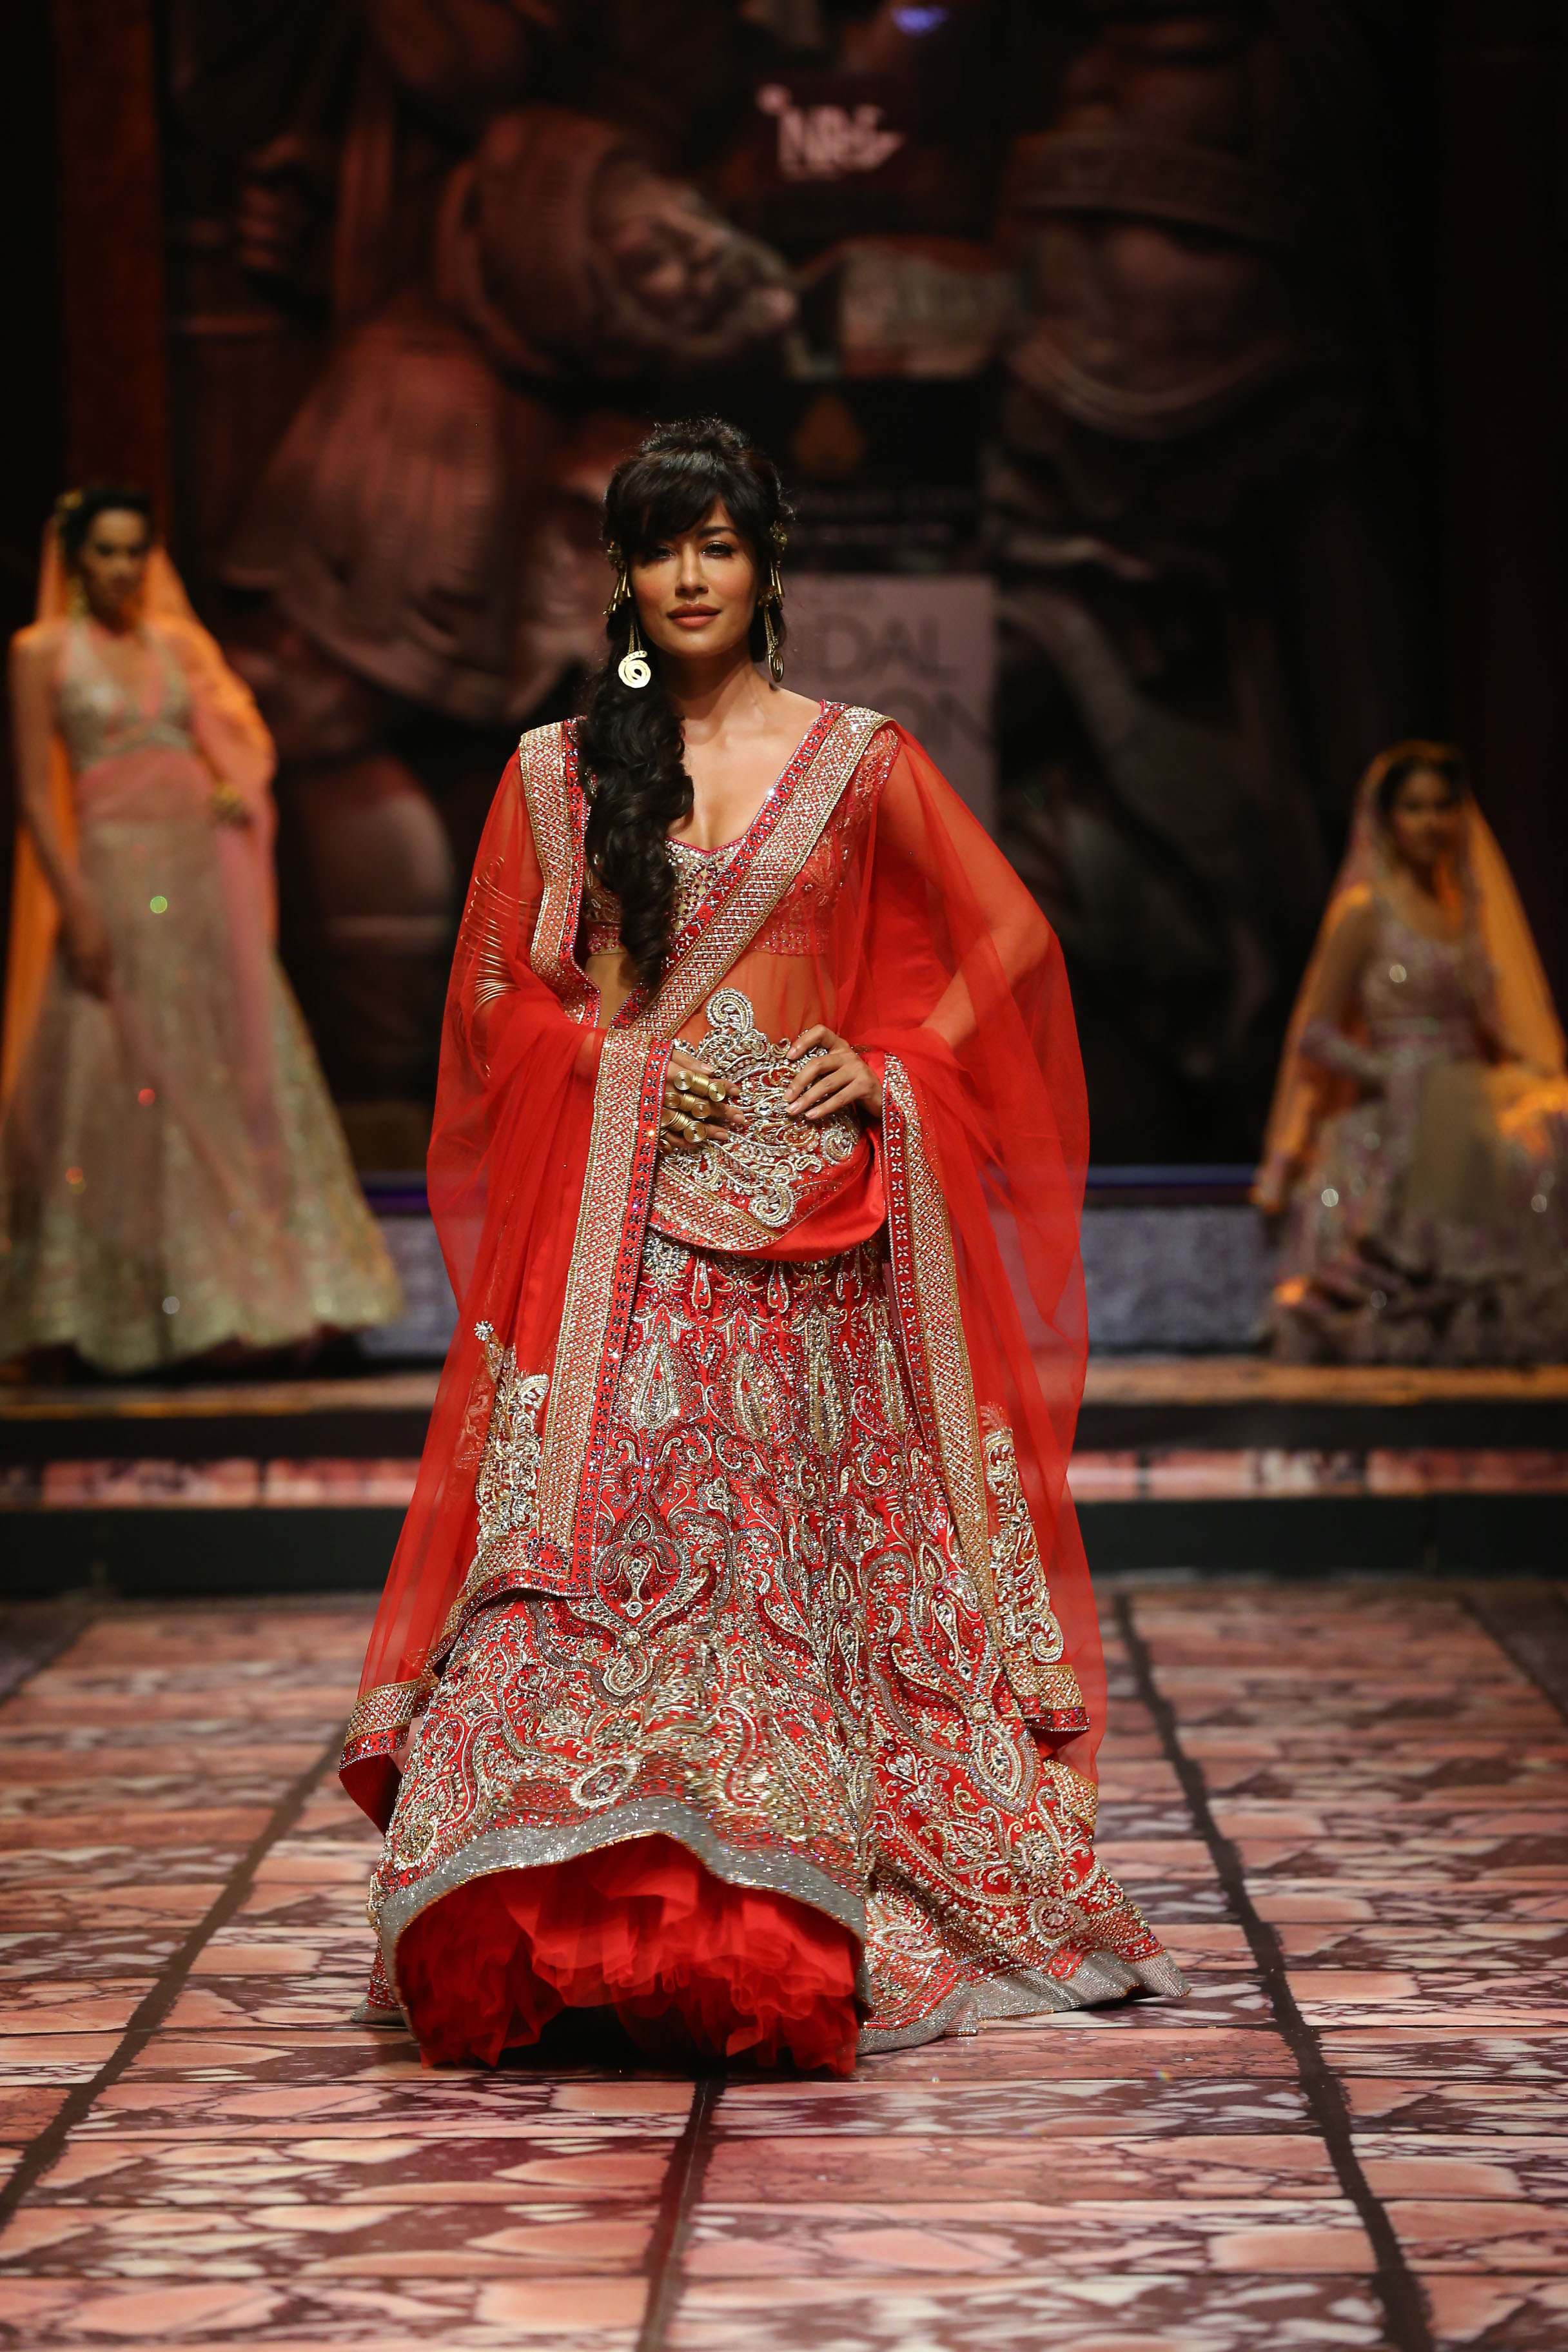 Chitrangada Singh as the showstopper for Suneet Varma's Collection